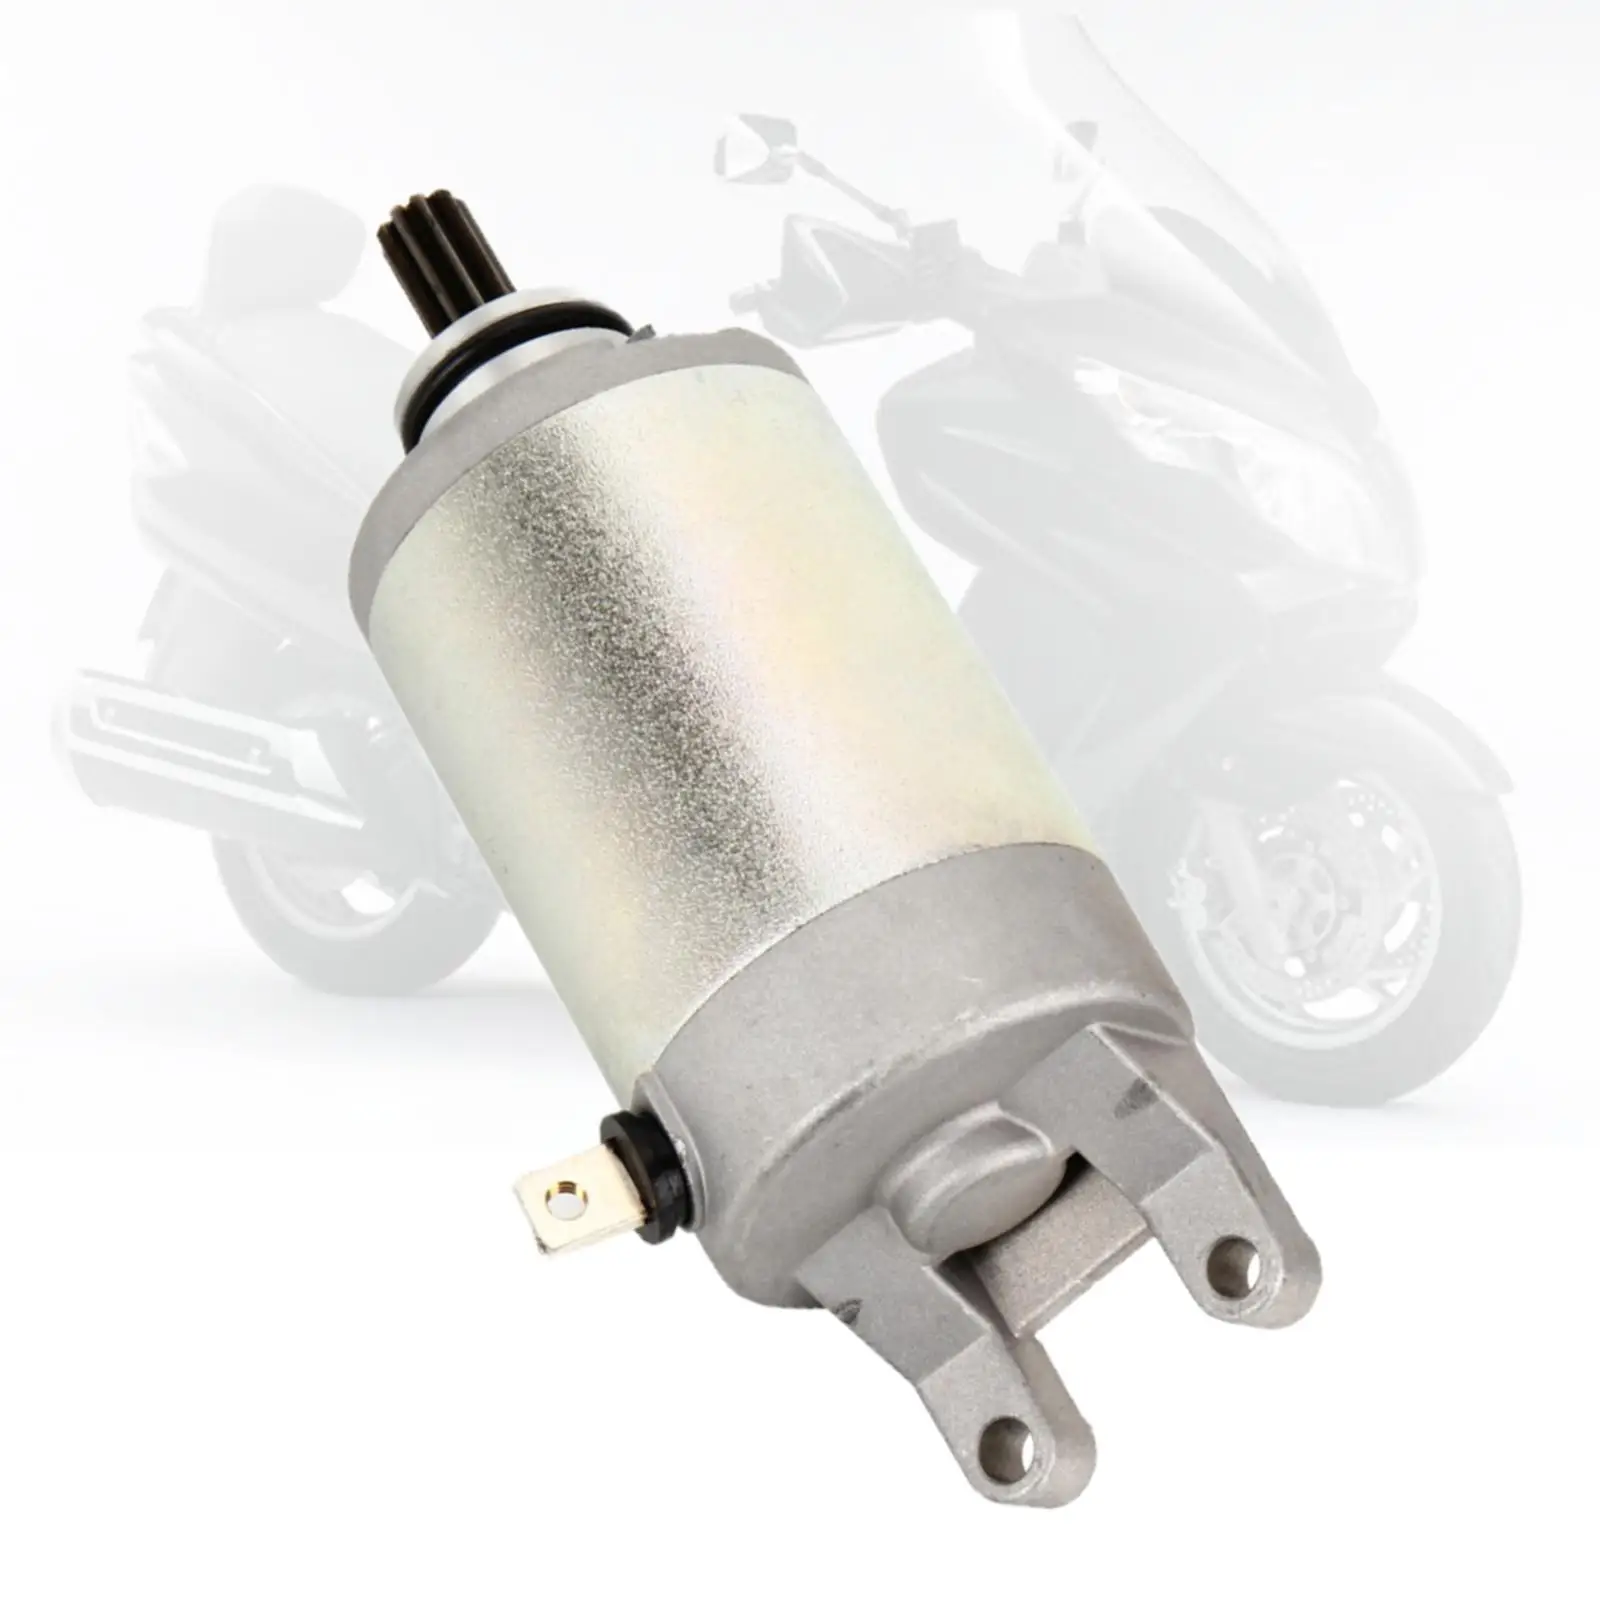 Motorcycle Starter Motor Assembly for Suzuki AN250 AN400 31100-48H00